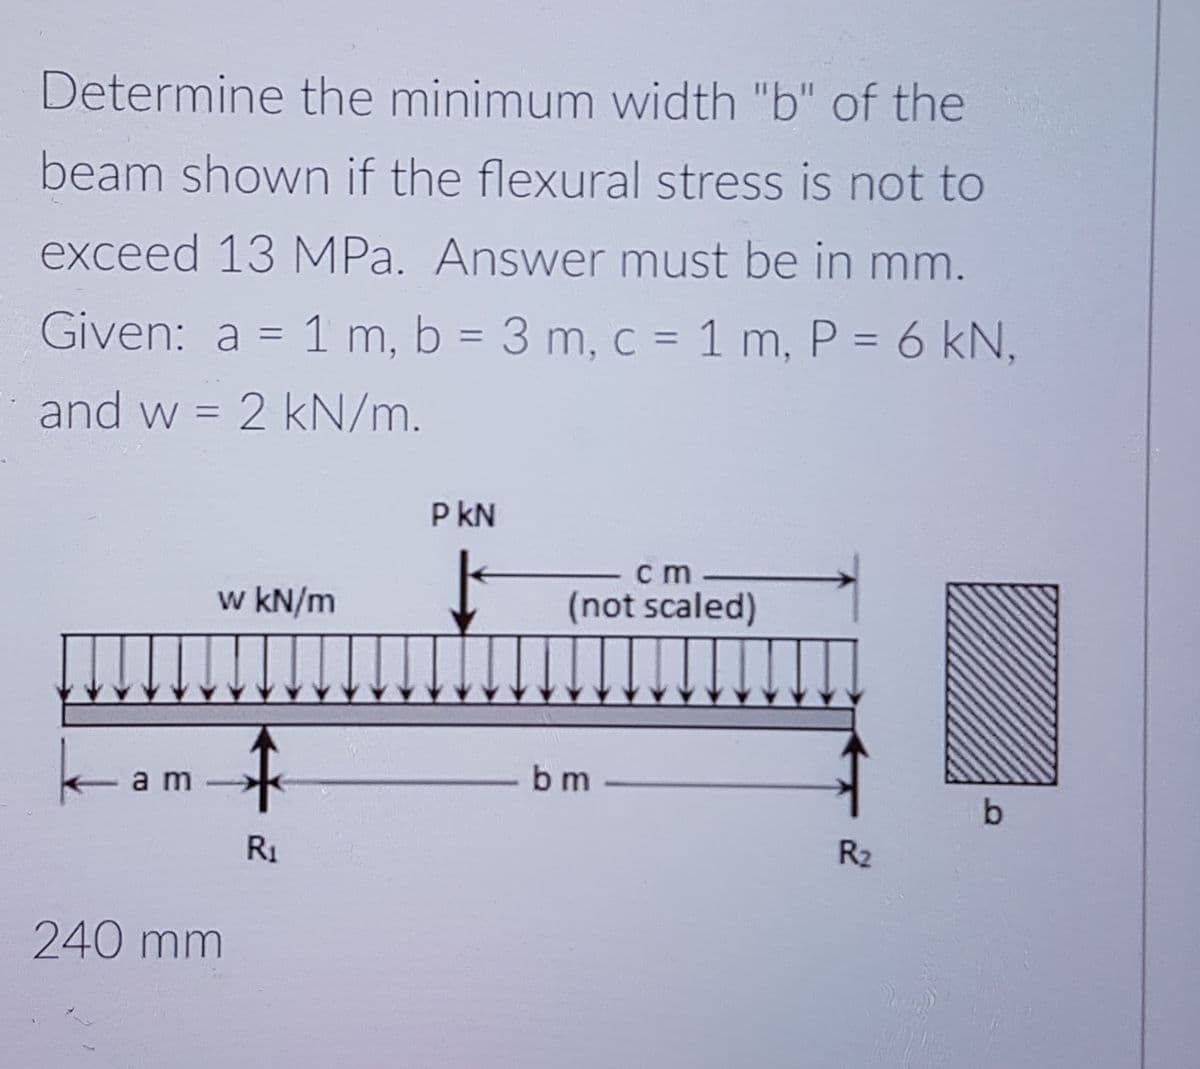 Determine the minimum width "b" of the
beam shown if the flexural stress is not to
exceed 13 MPa. Answer must be in mm.
Given: a = 1 m, b = 3 m, c = 1 m, P = 6 kN,
%3D
%3D
and w = 2 kN/m.
%3D
P kN
w kN/m
c m
(not scaled)
komf
a m
b m
R1
R2
240 mm
